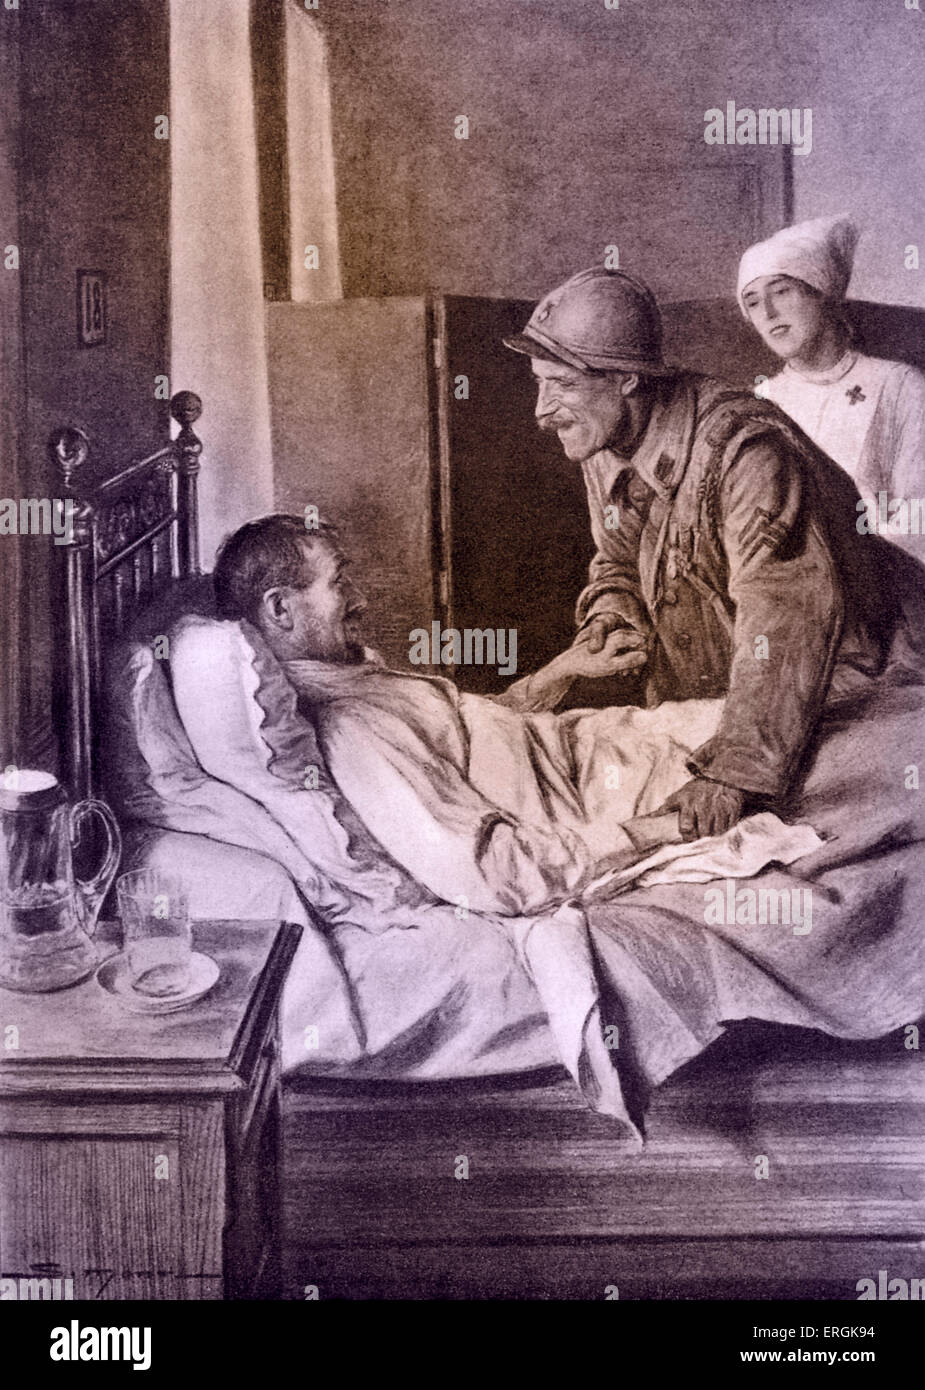 A wounded French soldier is visited by fellow infantryman in hospital, following the defense of Fort Douaumont in Verdun, Stock Photo